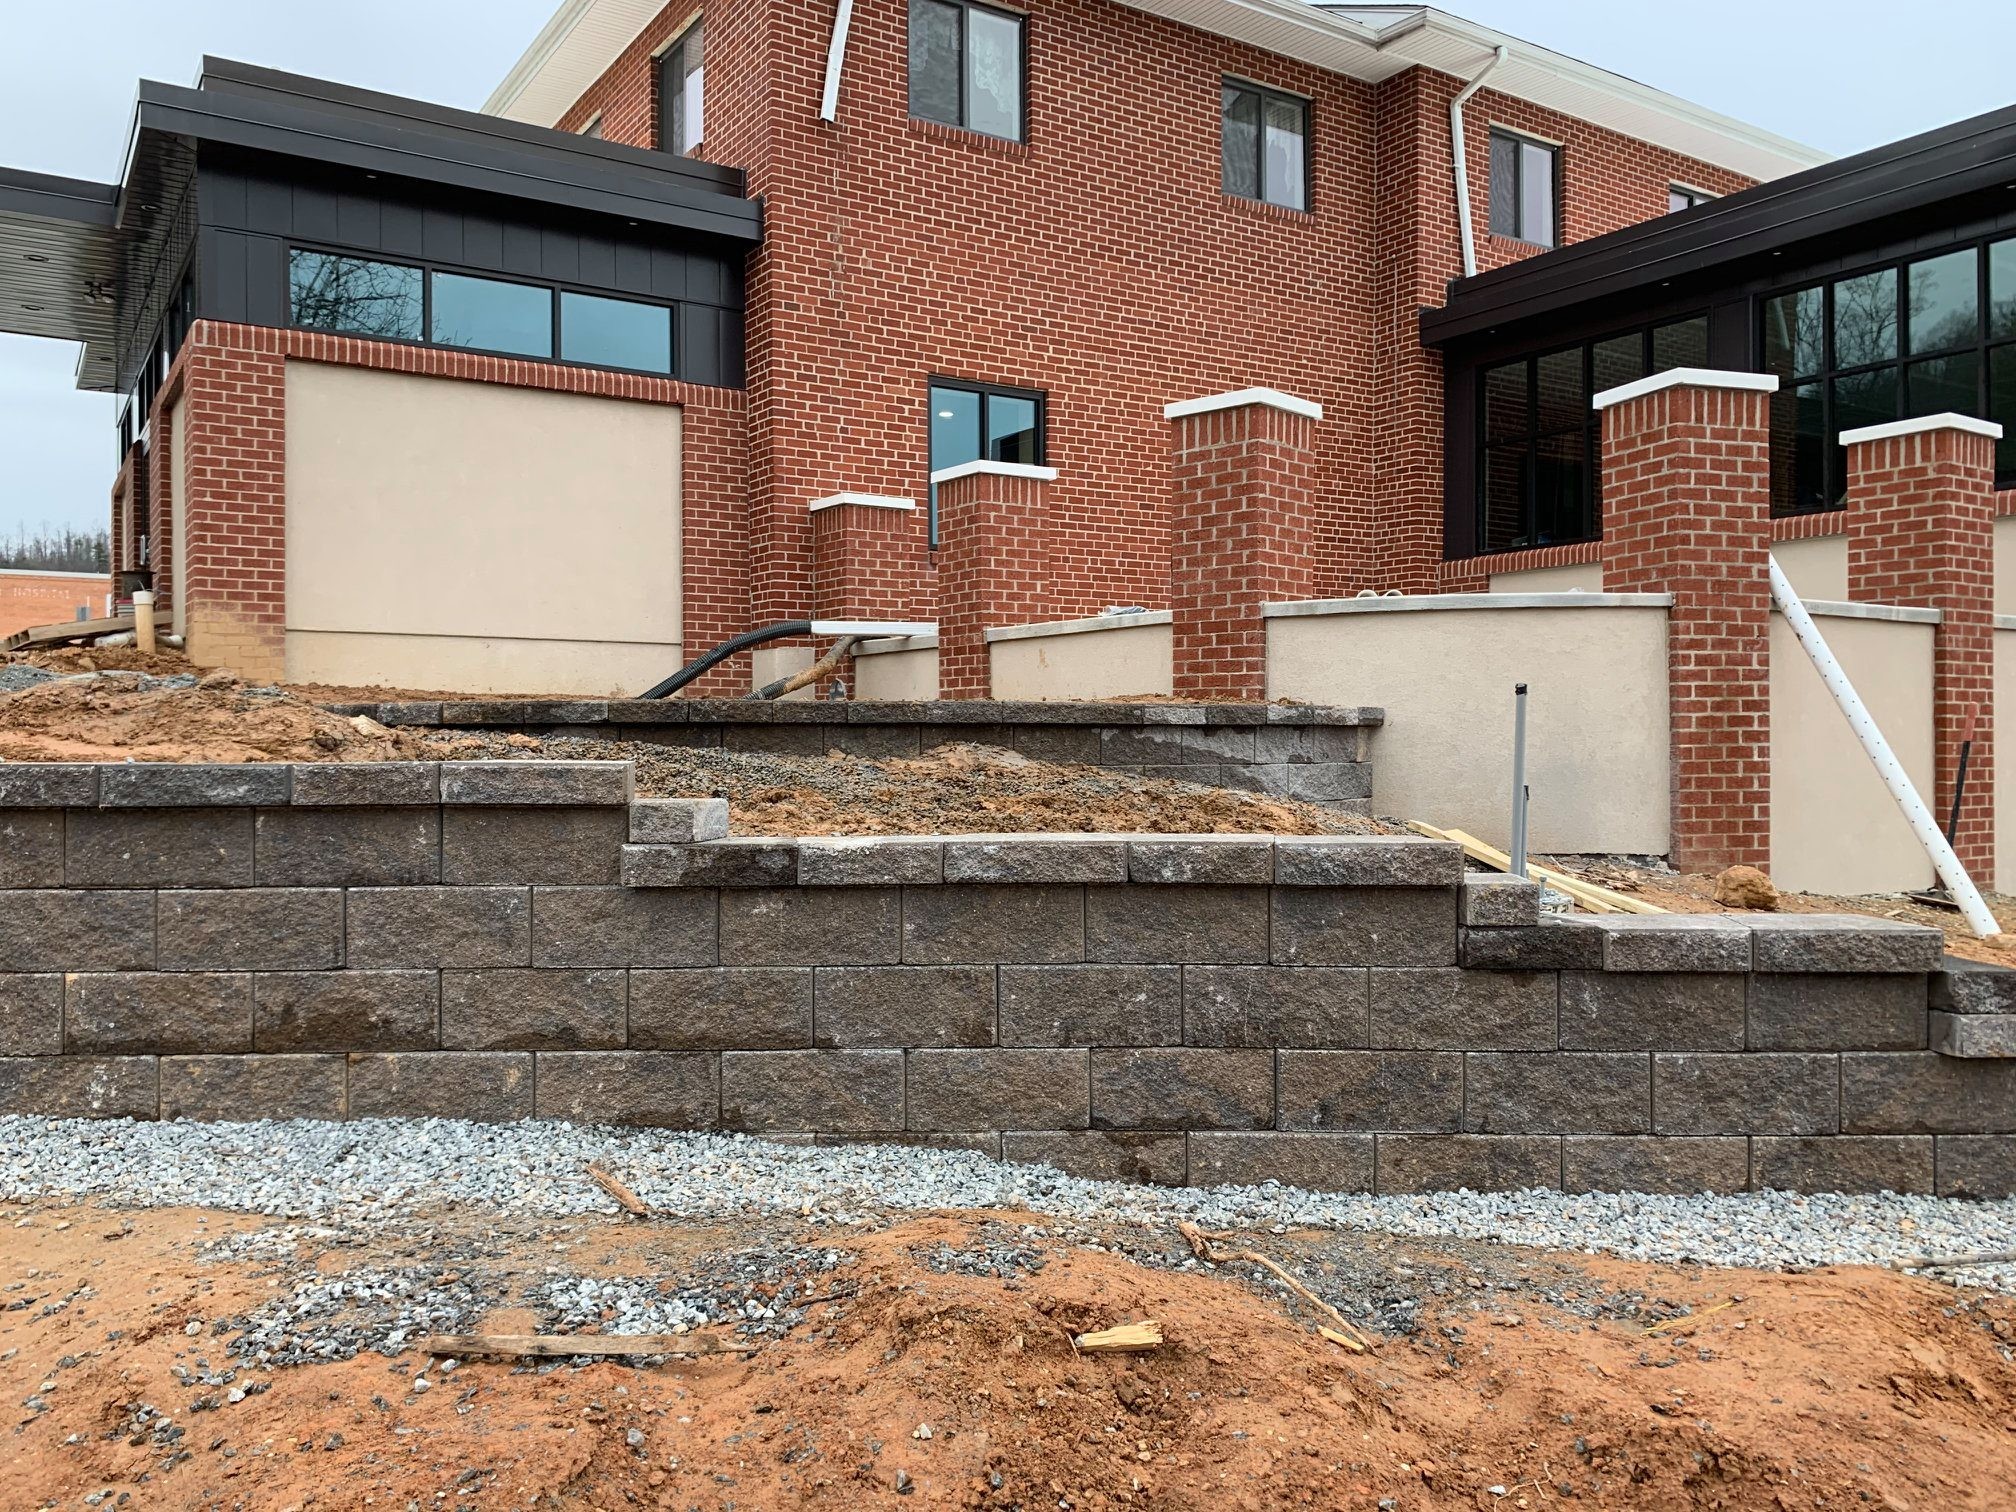 Retaining Wall Construction for HG Landscape Plus in Asheville, NC